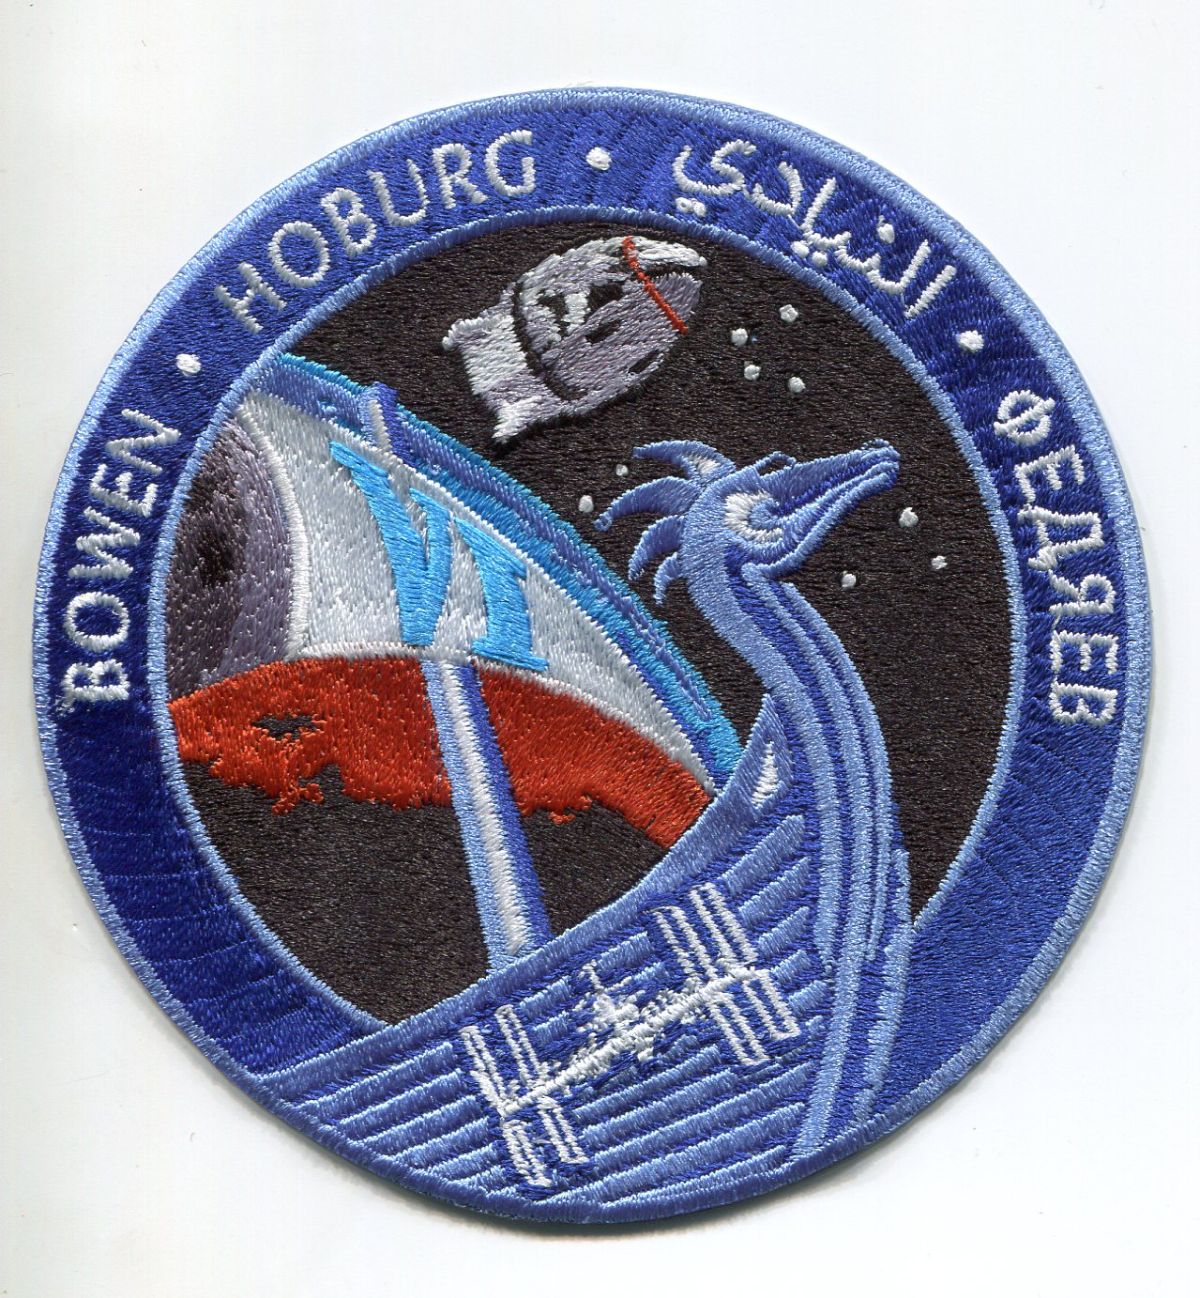 spacexcrew6patch